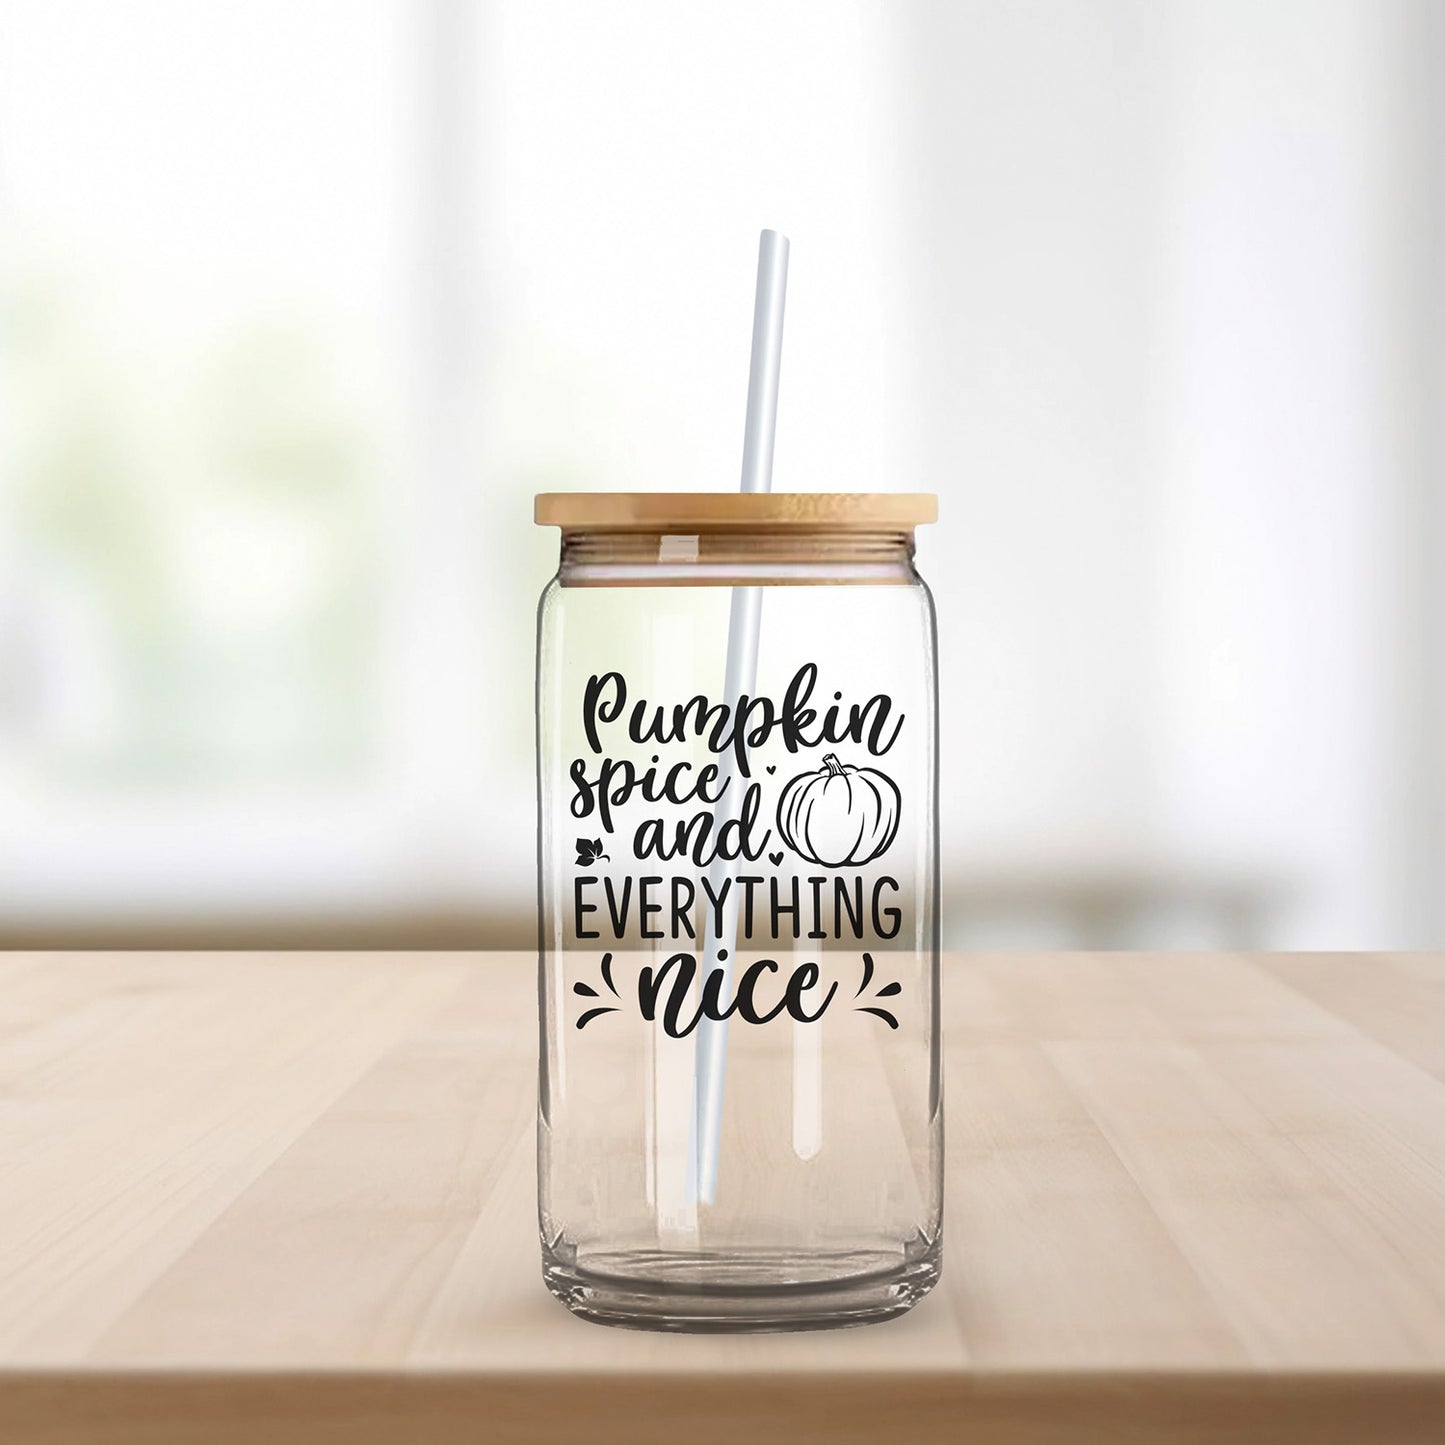 "Pumpkin Spice and Everything Nice" With Pumpkin Graphic